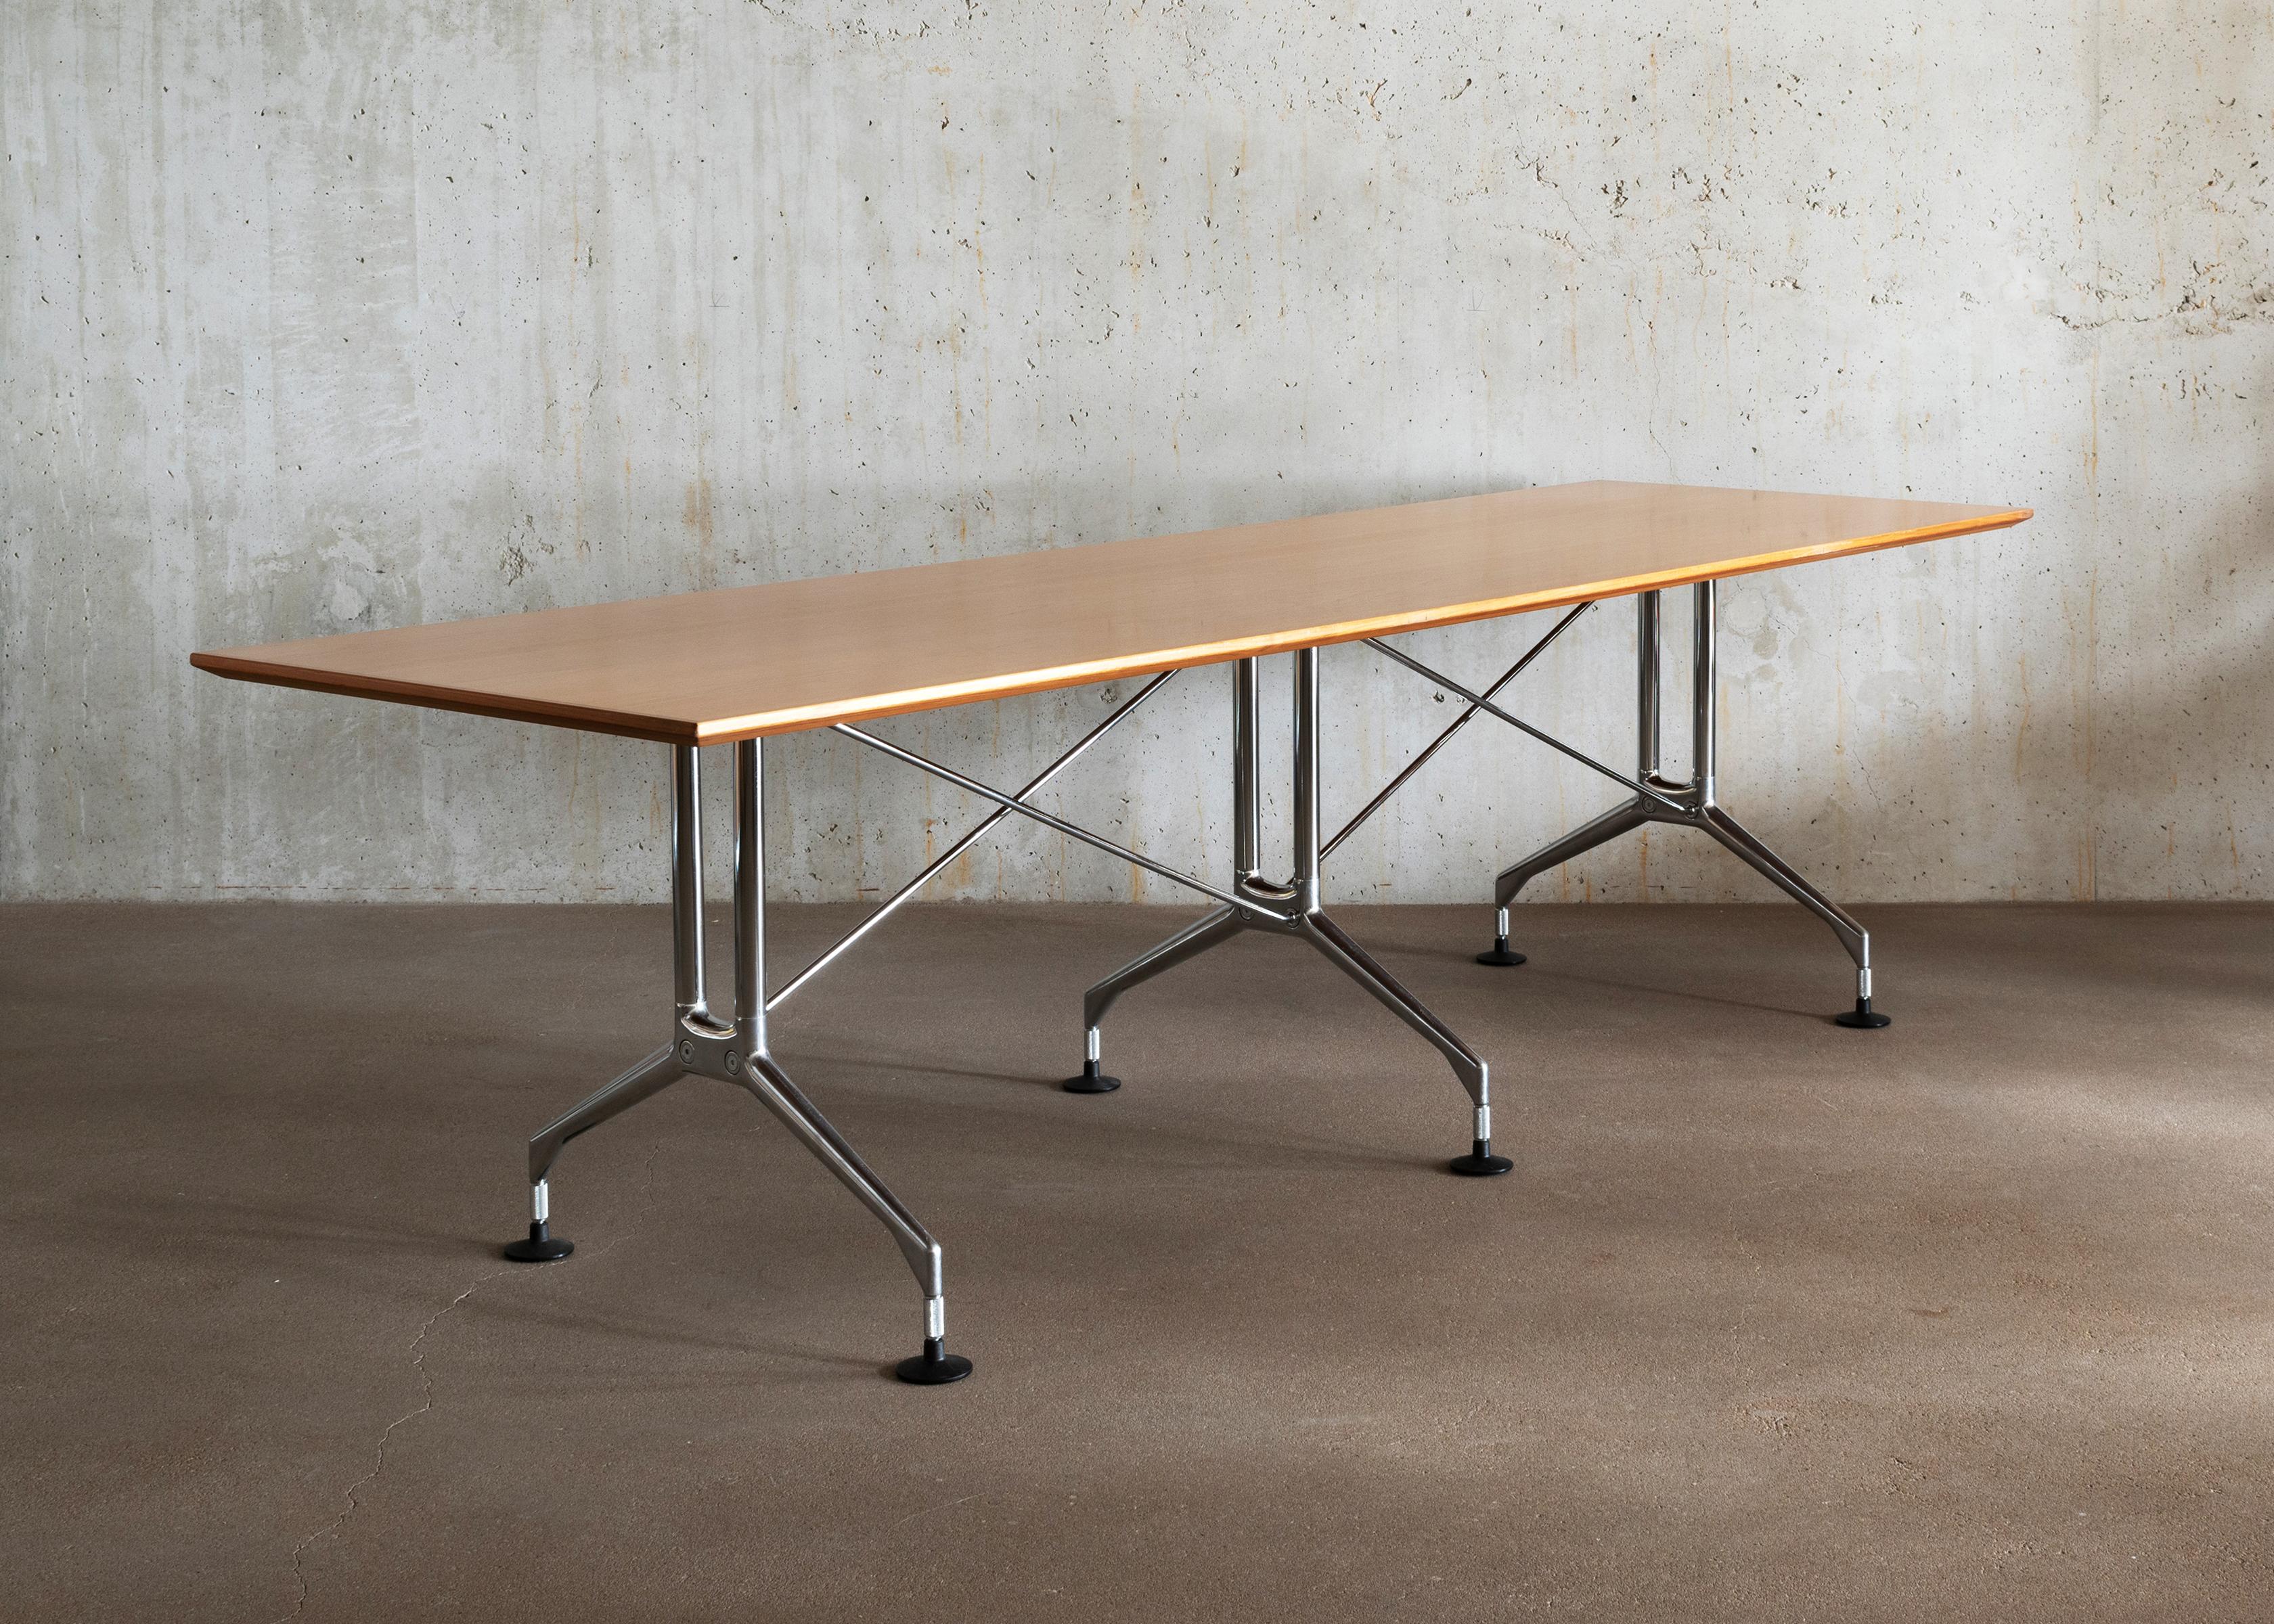 Late 20th Century Antonio Citterio Spatio Table in Oak Veneer and Chrome Plated Steel for Vitra